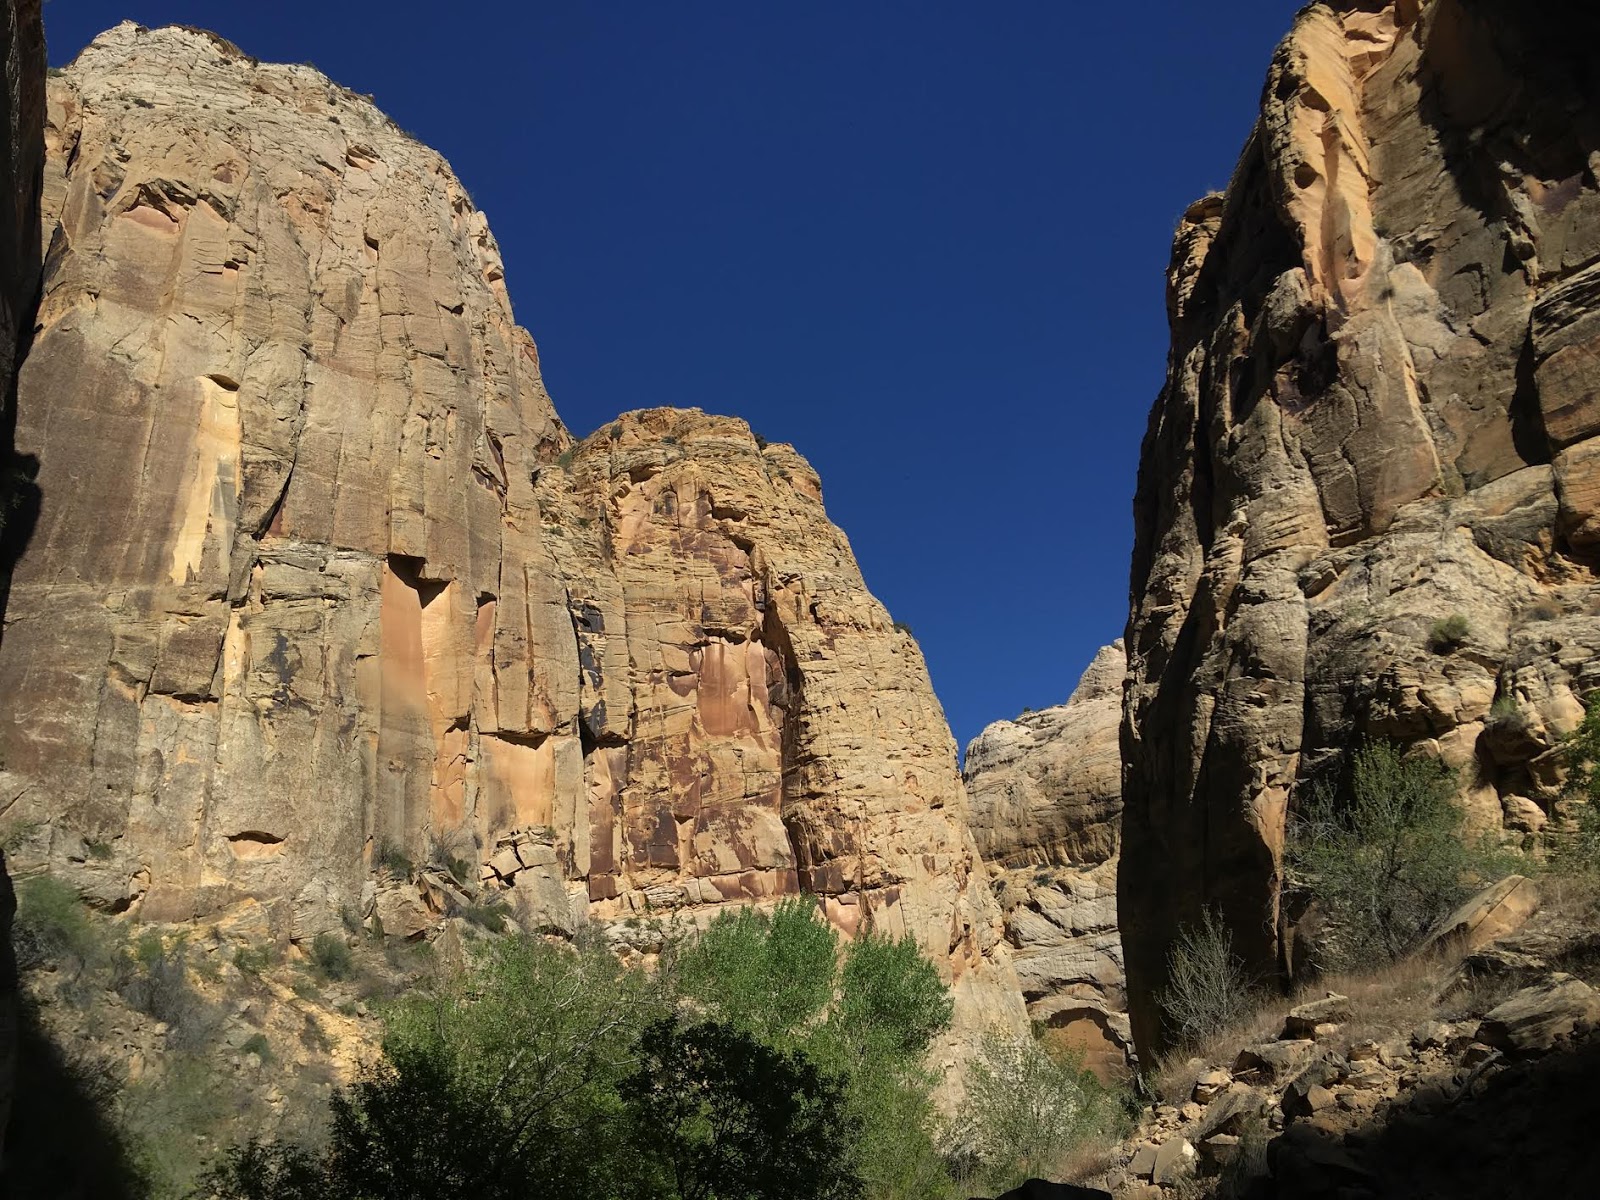 Backpacking the Escalante River Trail - UnnameD 2